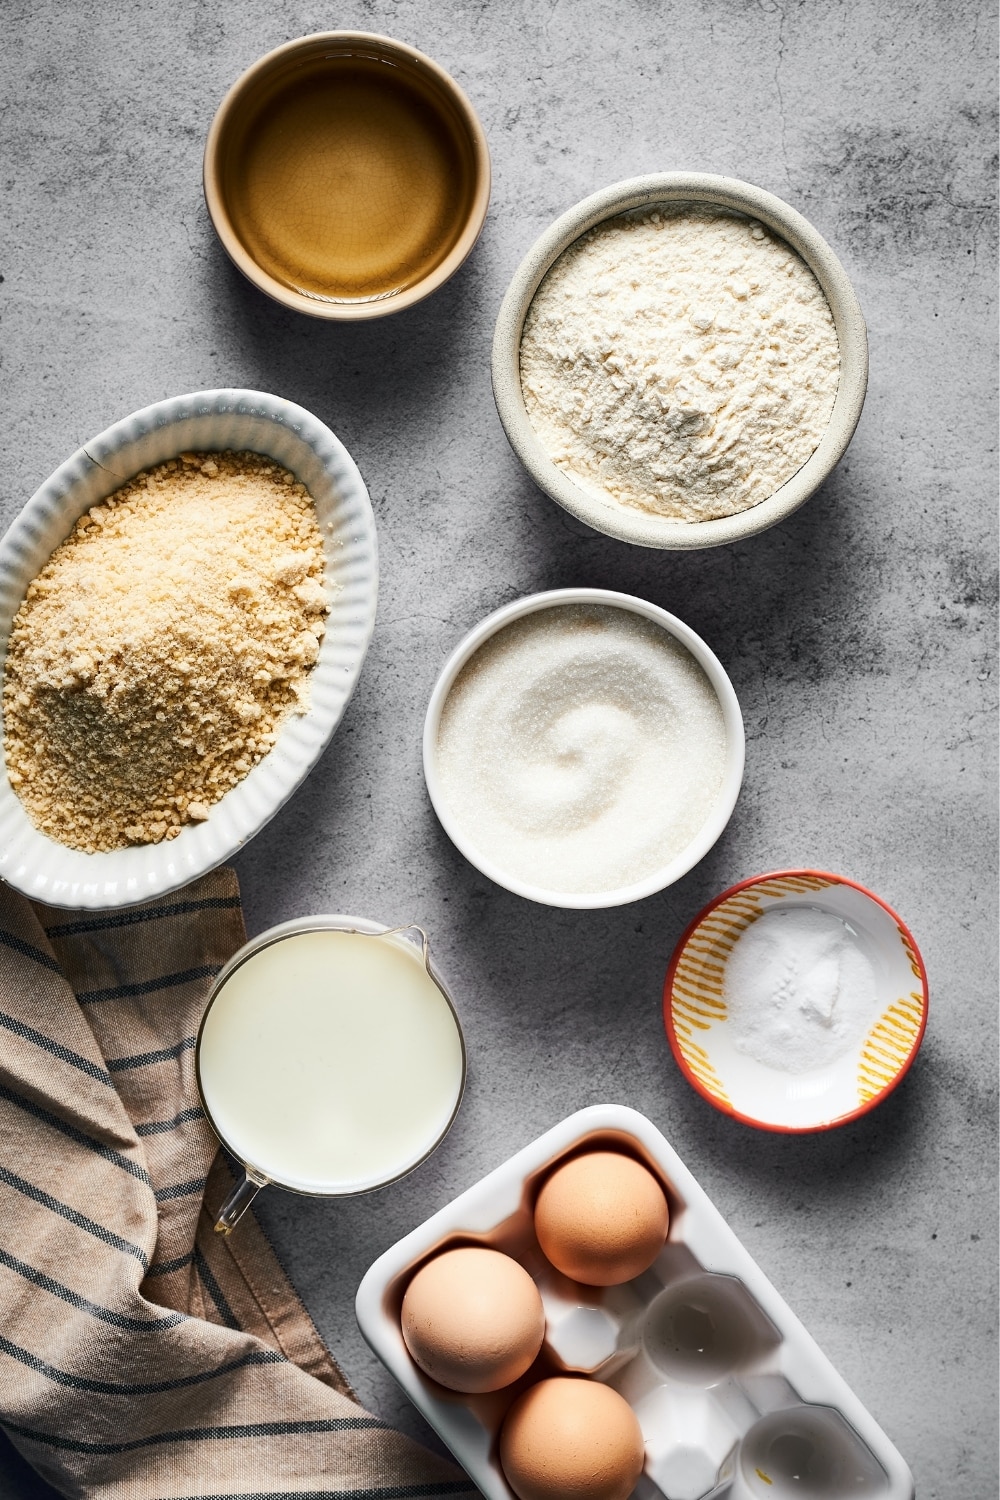 A small bowl of sugar, a small bowl of vegetable oil, a medium bowl of flour, an oval bowl of almond flour, and a measuring cup of buttermilk on a gray counter. A carton of eggs is in front of all the bowls.